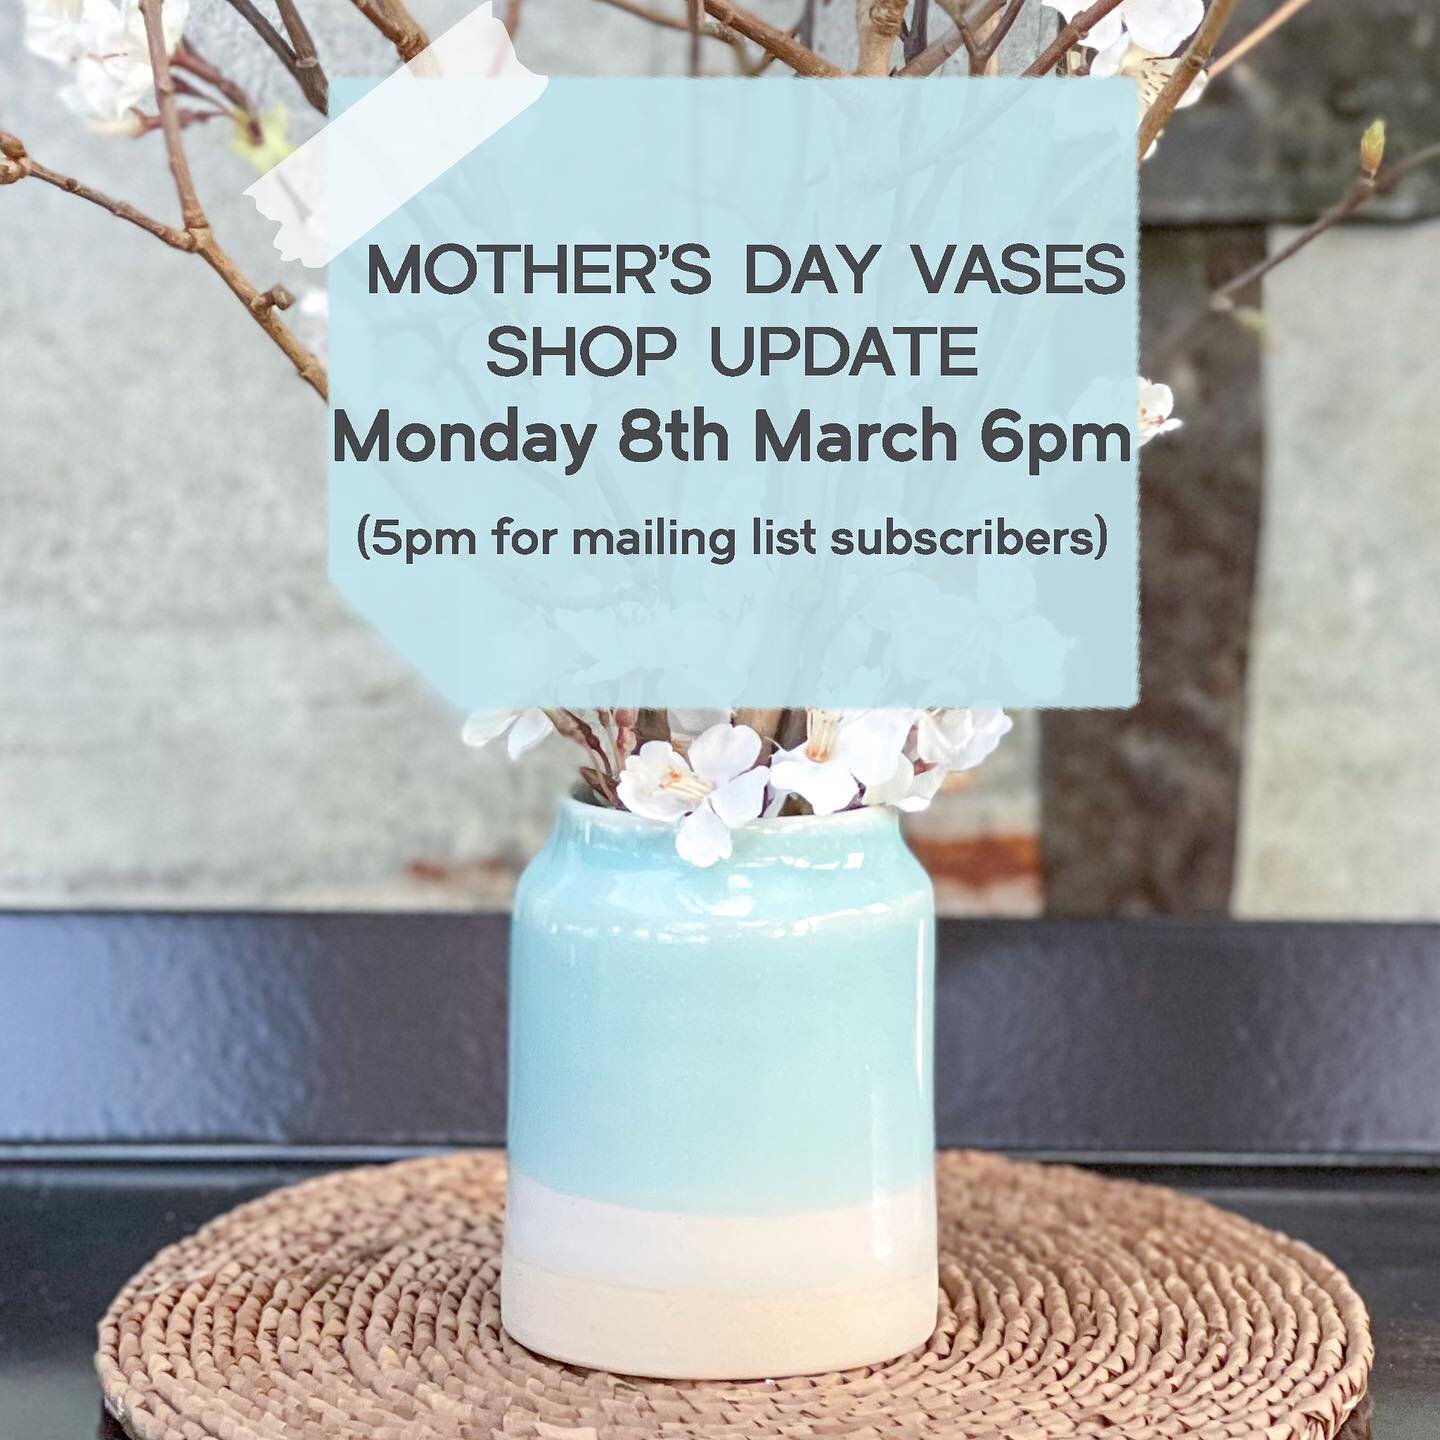 Shop Update - Mother&rsquo;s Day Vases 

Monday 8th March at 6pm (or get early access from 5pm if you sign up to my mailing list)

Vases were super popular last time and I&rsquo;ve had lots of lovely messages seeing if I had any available for Mother&